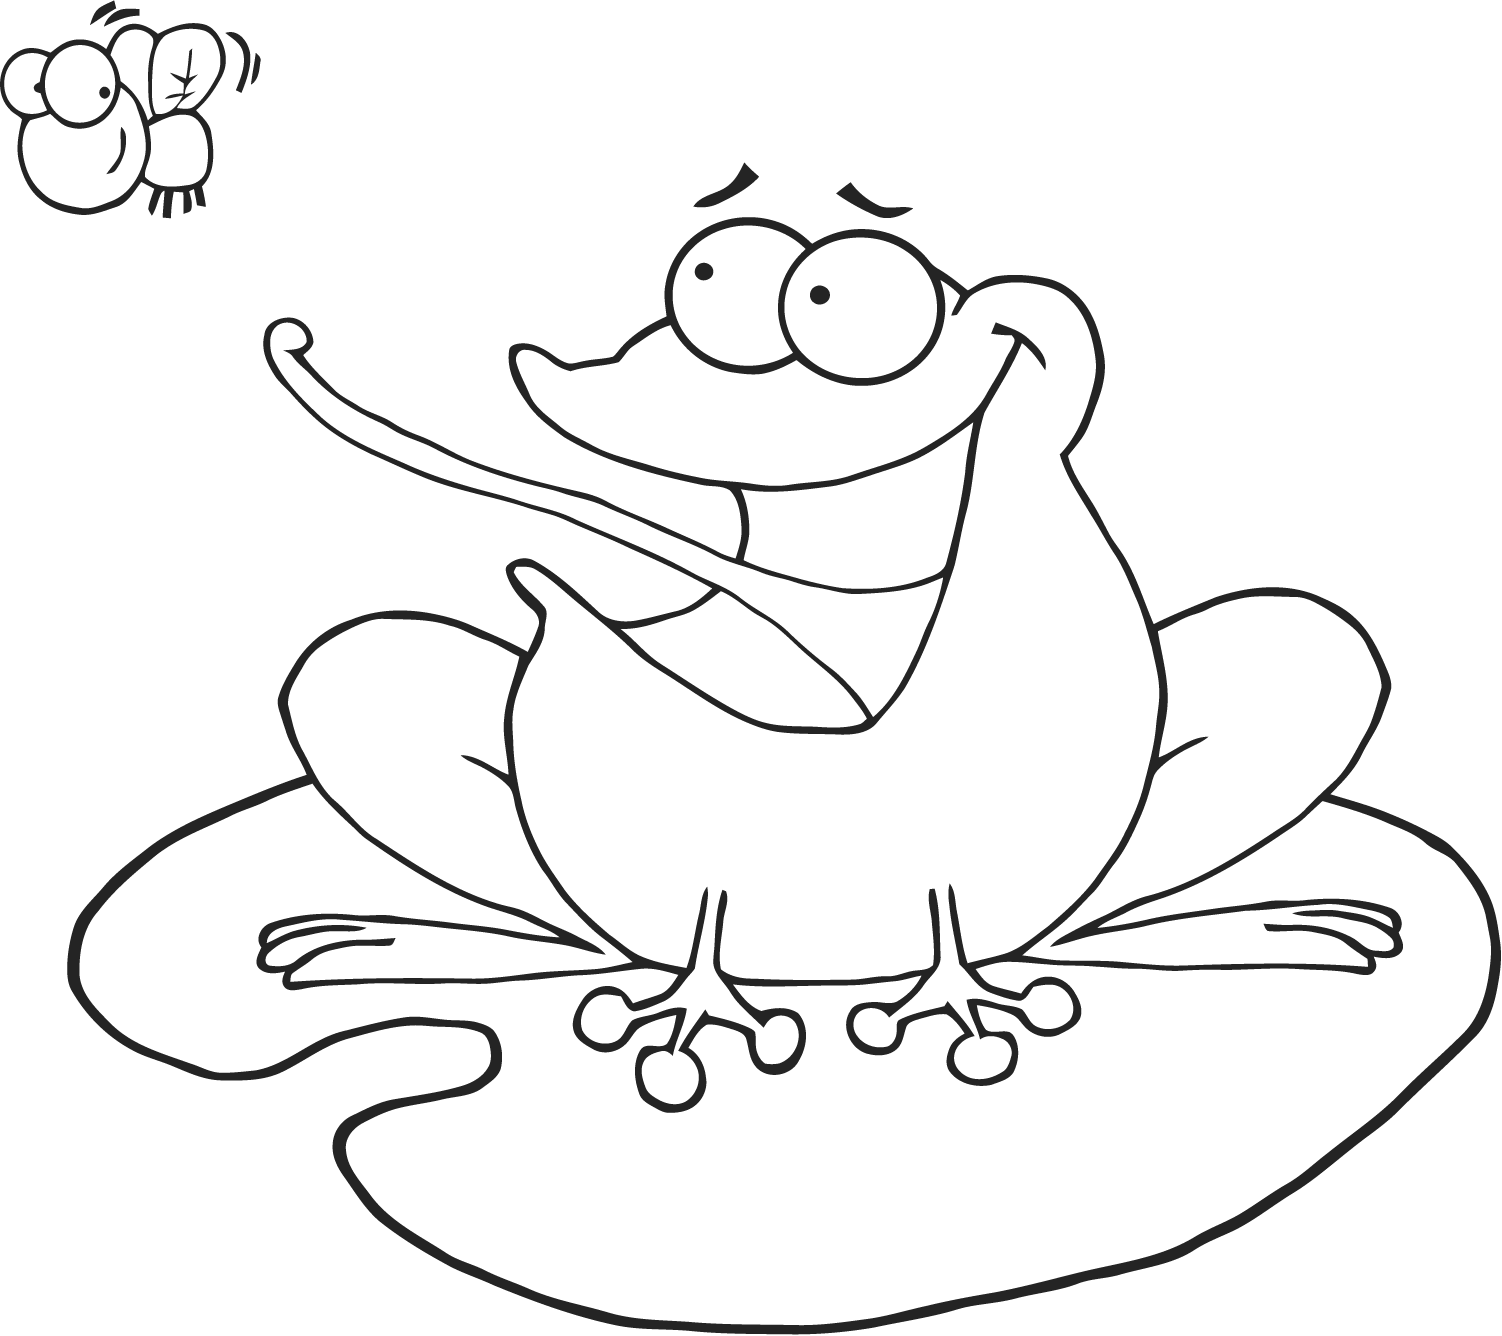 colouring pages coloring page of a frog - VoteForVerde.com